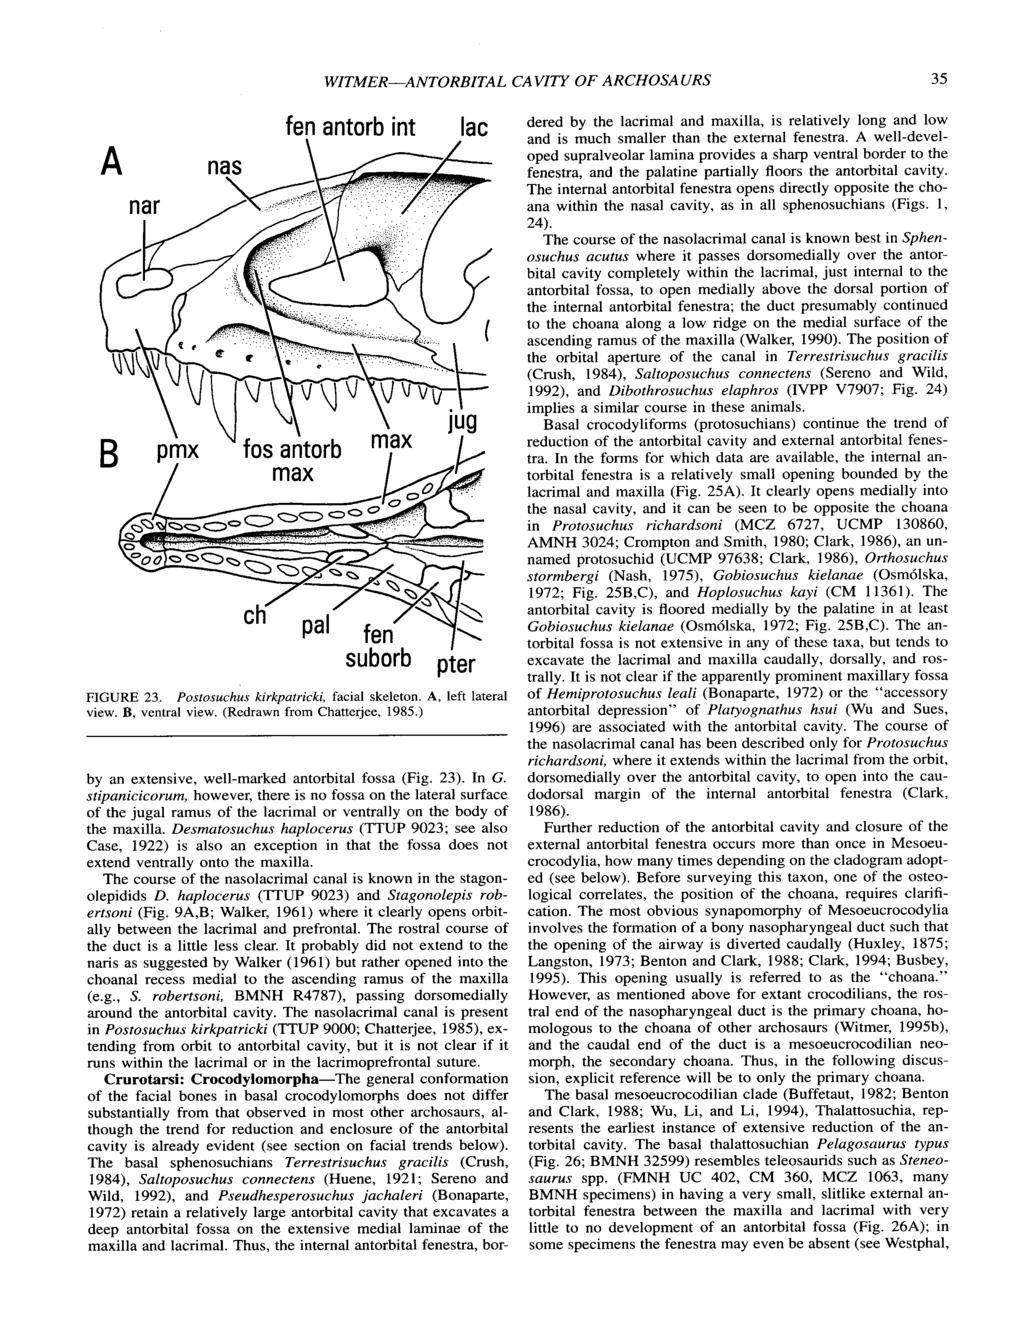 WITMERANTORBITAL ( 7AVITY OF ARCHOSA URS 35 fen antorb int suborb lac pier FIGURE 23. Postosuchus kirkpatricki, facial skeleton. A, left lateral view. B, ventral view. (Redrawn from Chatterjee, 1985.